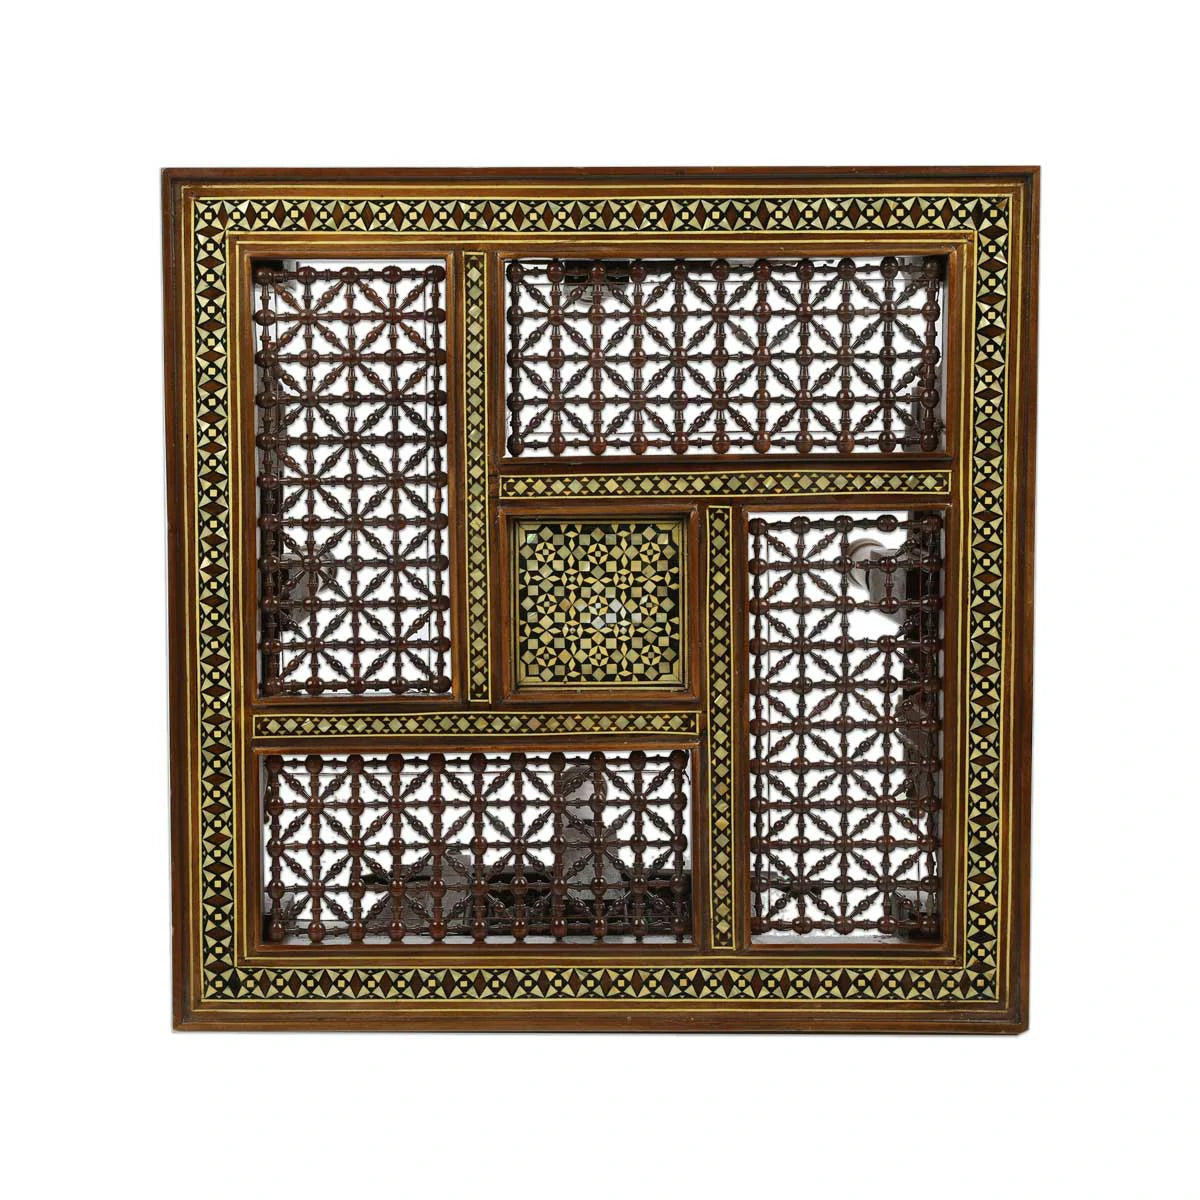 Top View of Artistic Arabesque Table